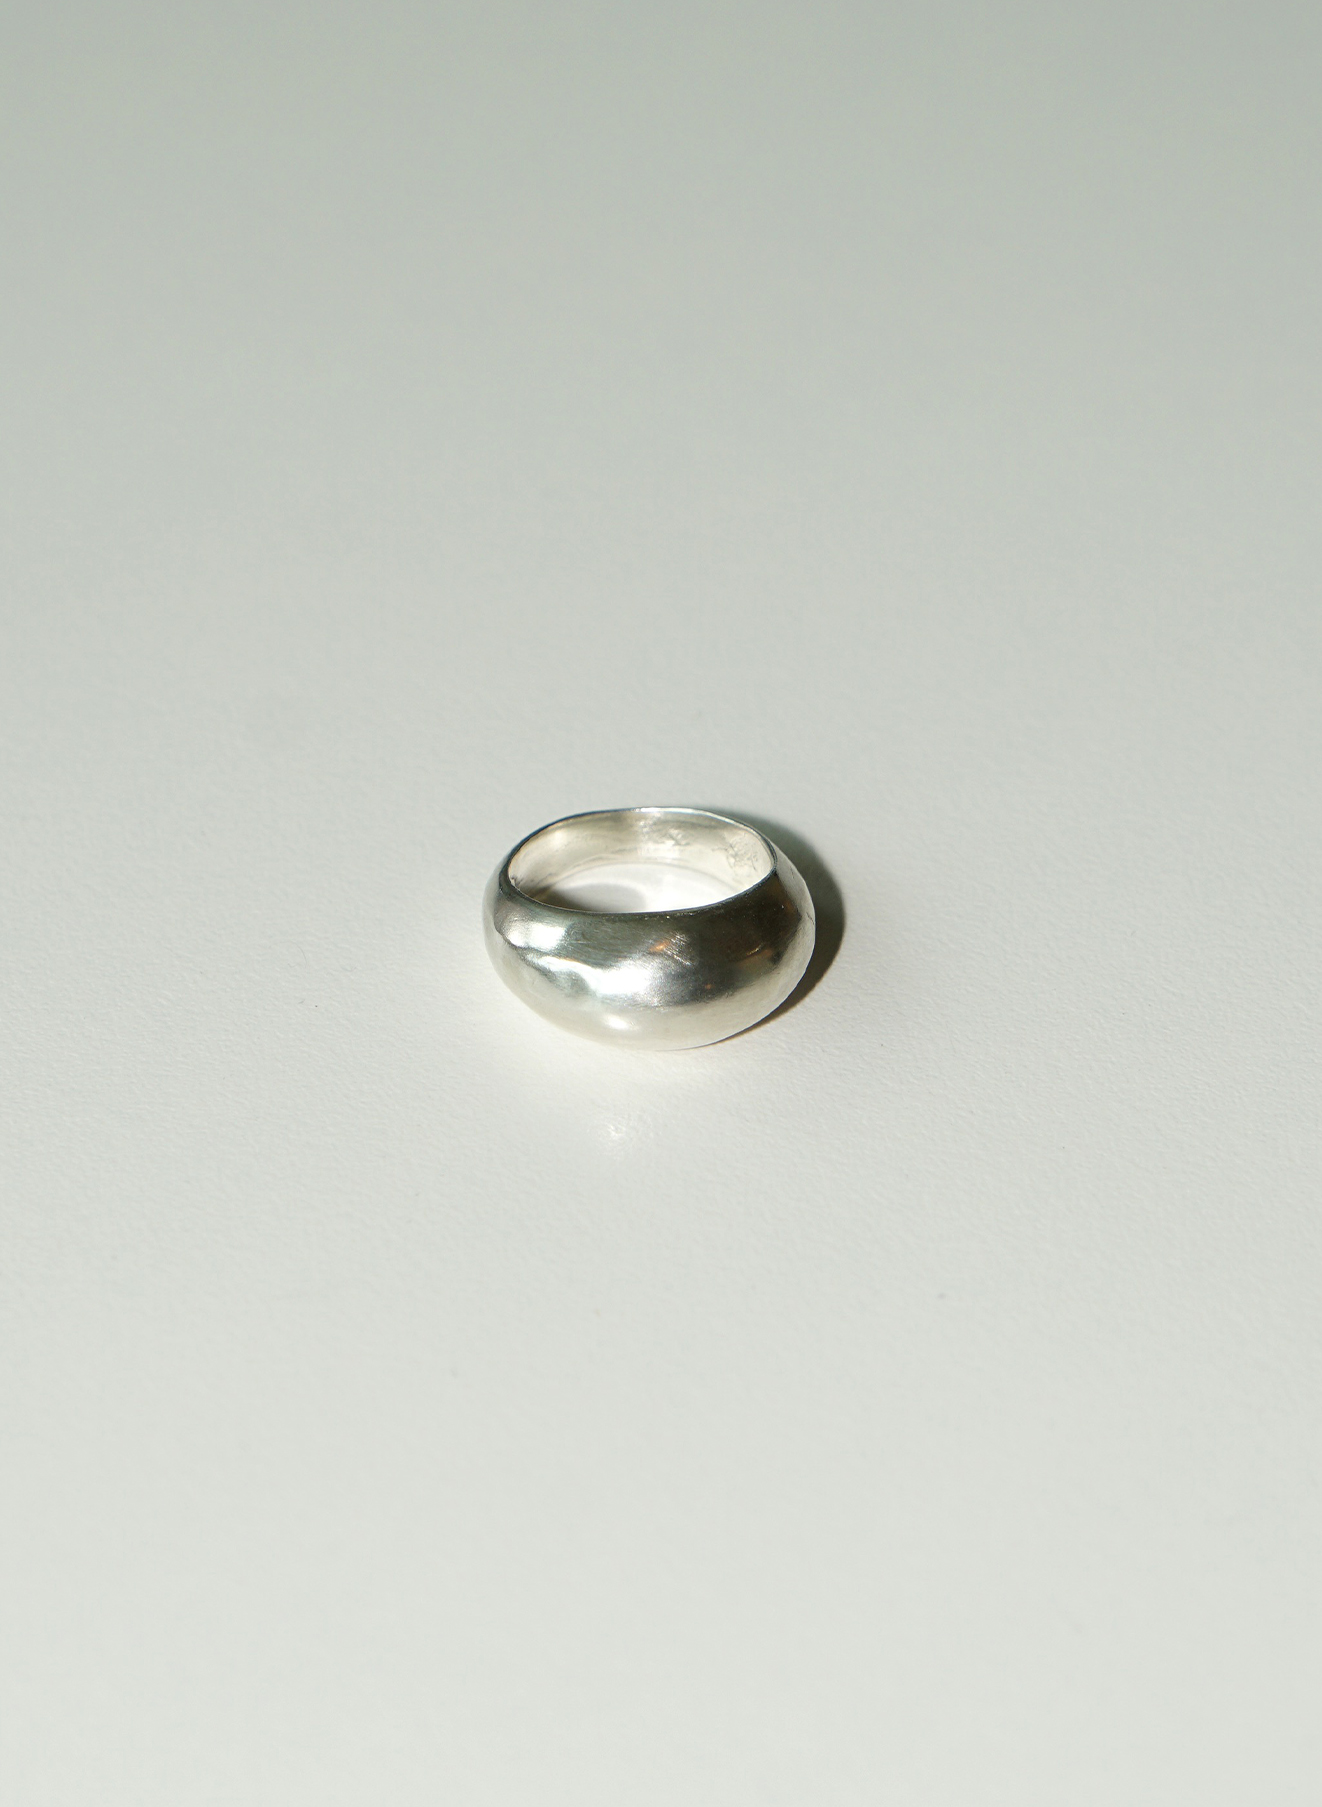 8mm bold silver 925 Ring